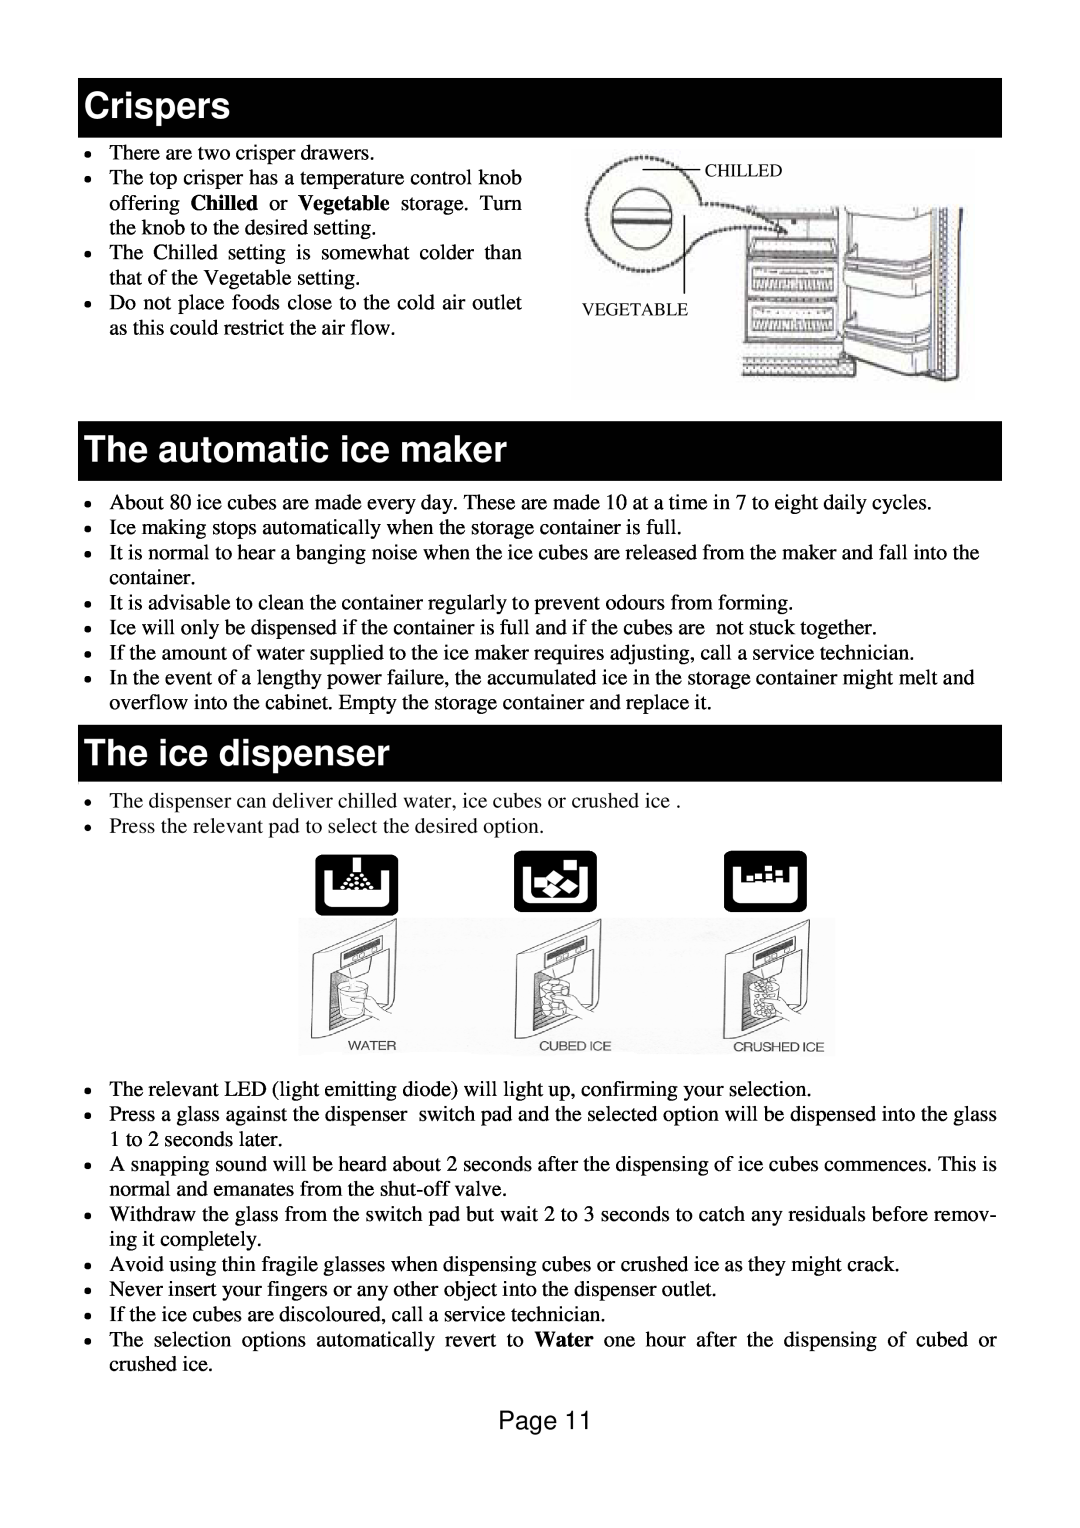 Defy Appliances F 600 LM owner manual Crispers, The automatic ice maker, The ice dispenser 